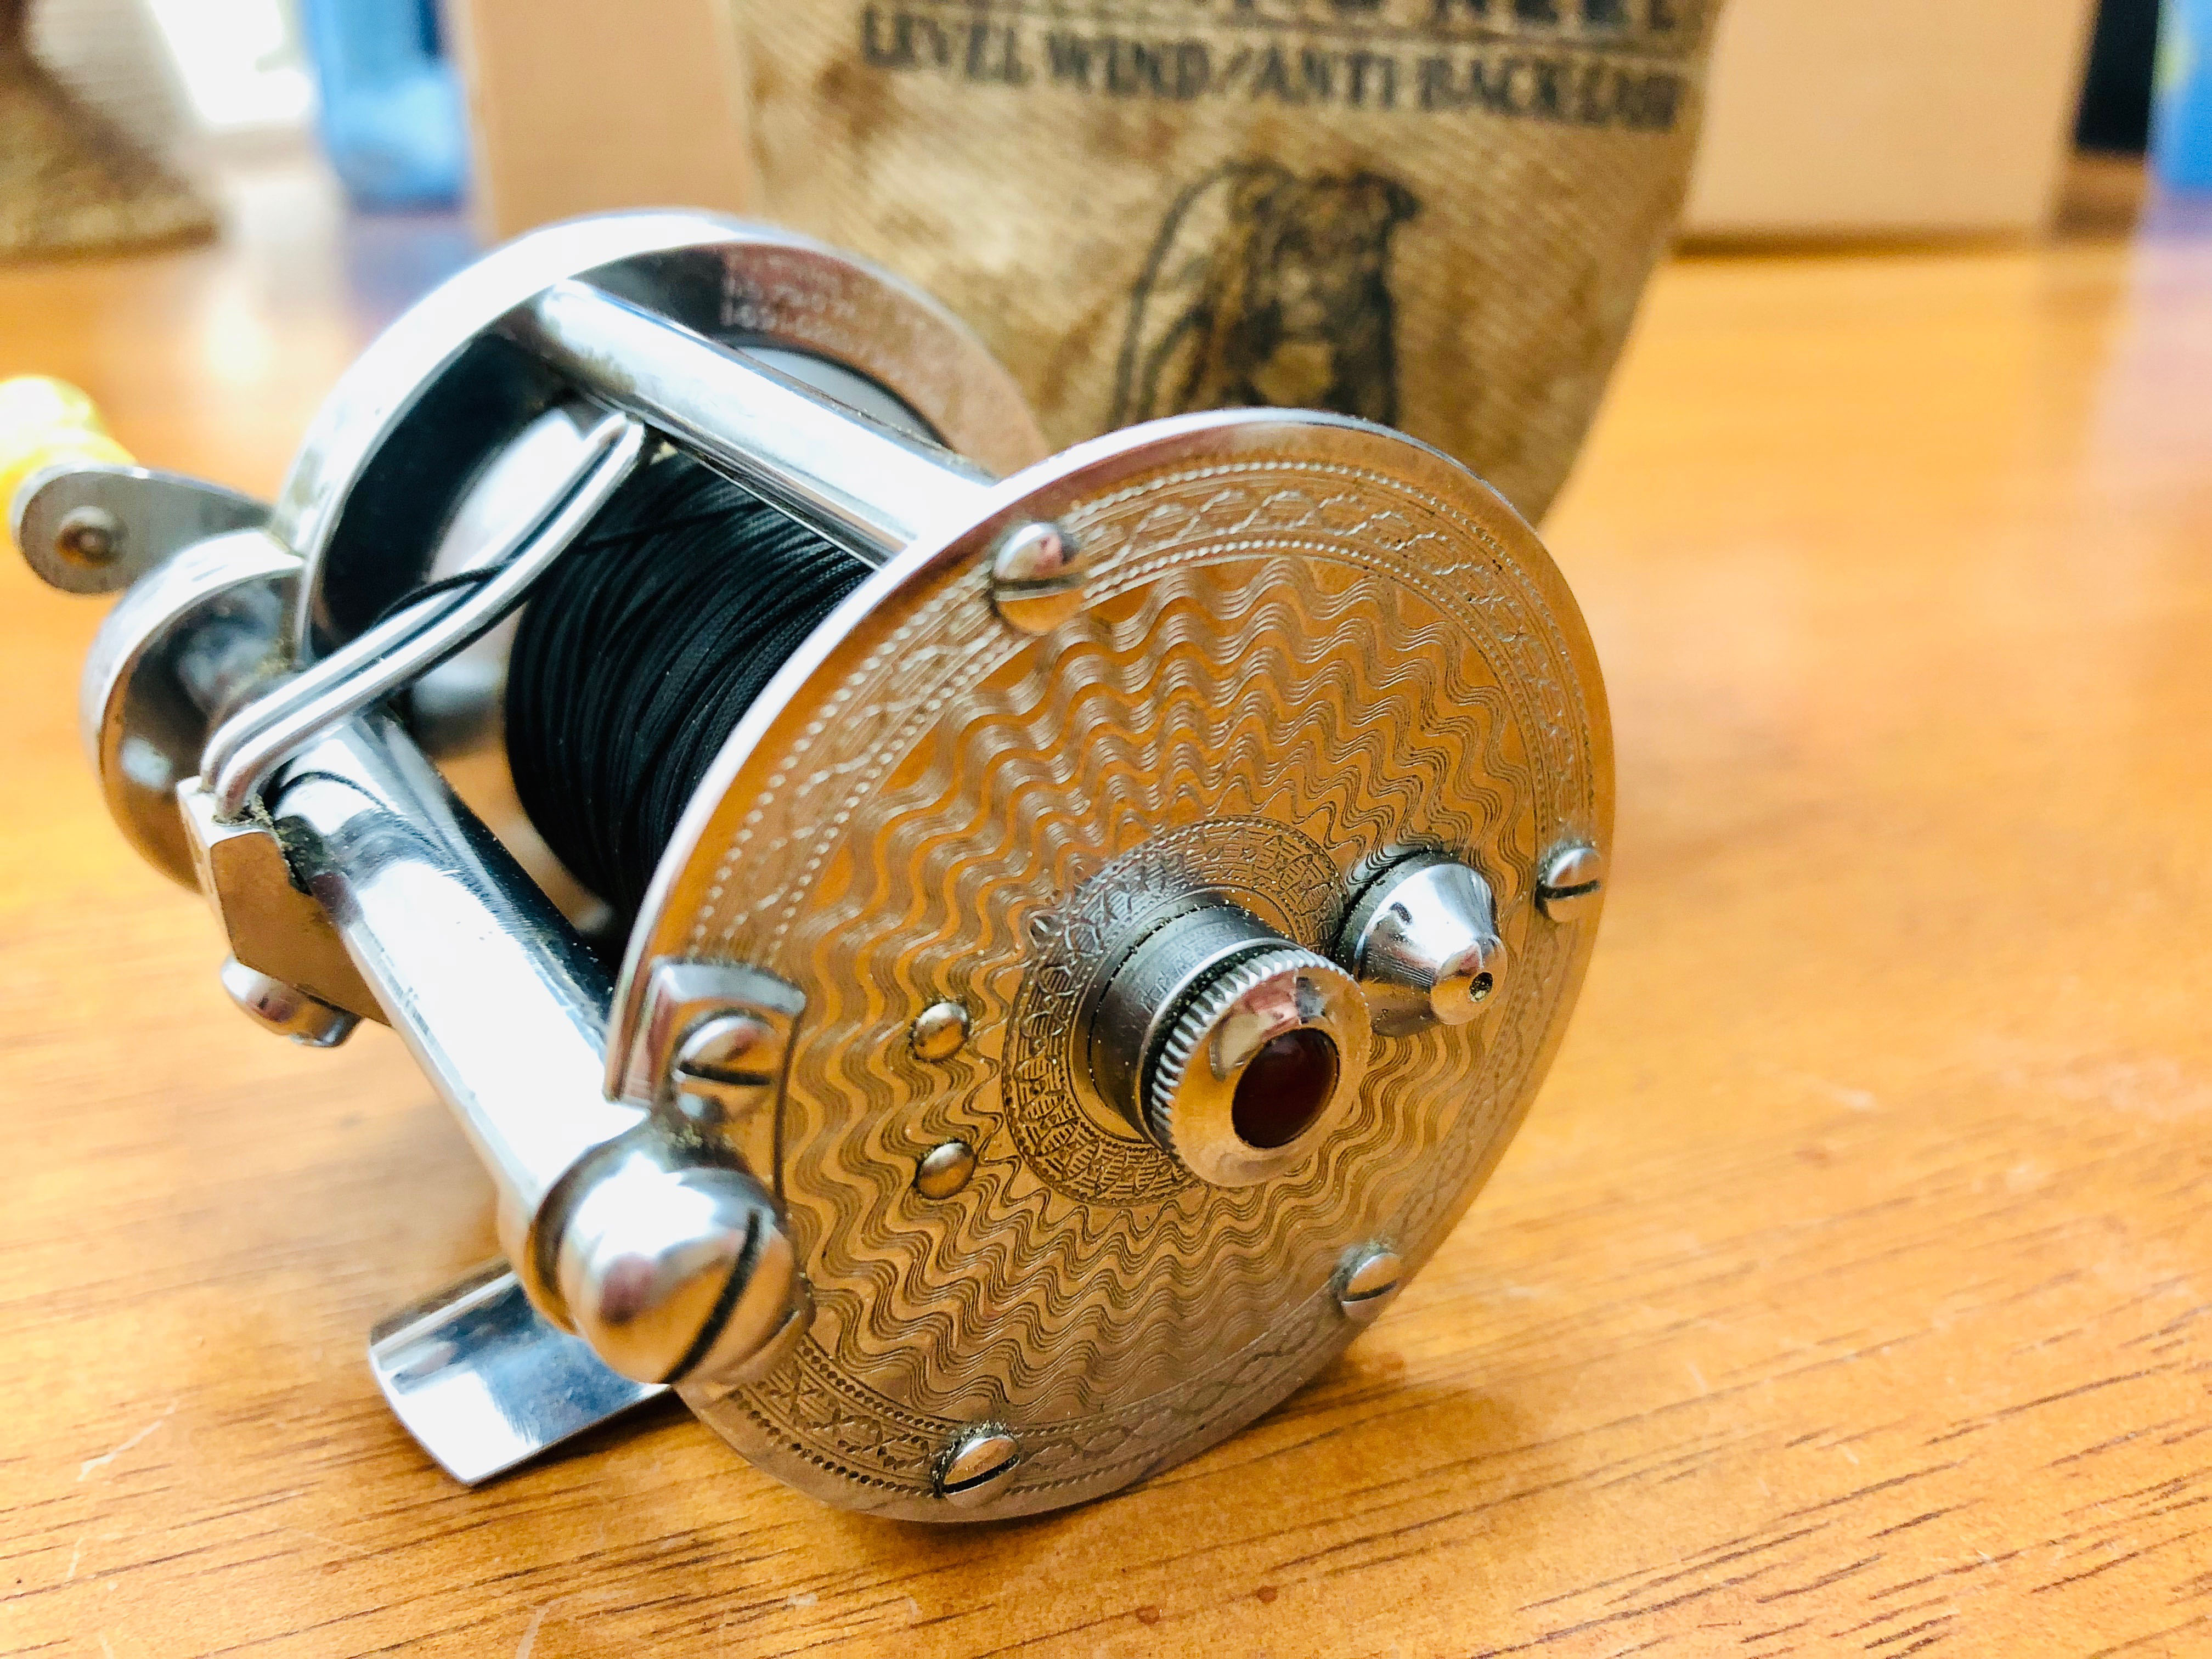 Found: New In Bag Pflueger Summit 1993L early jeweled model - Reel